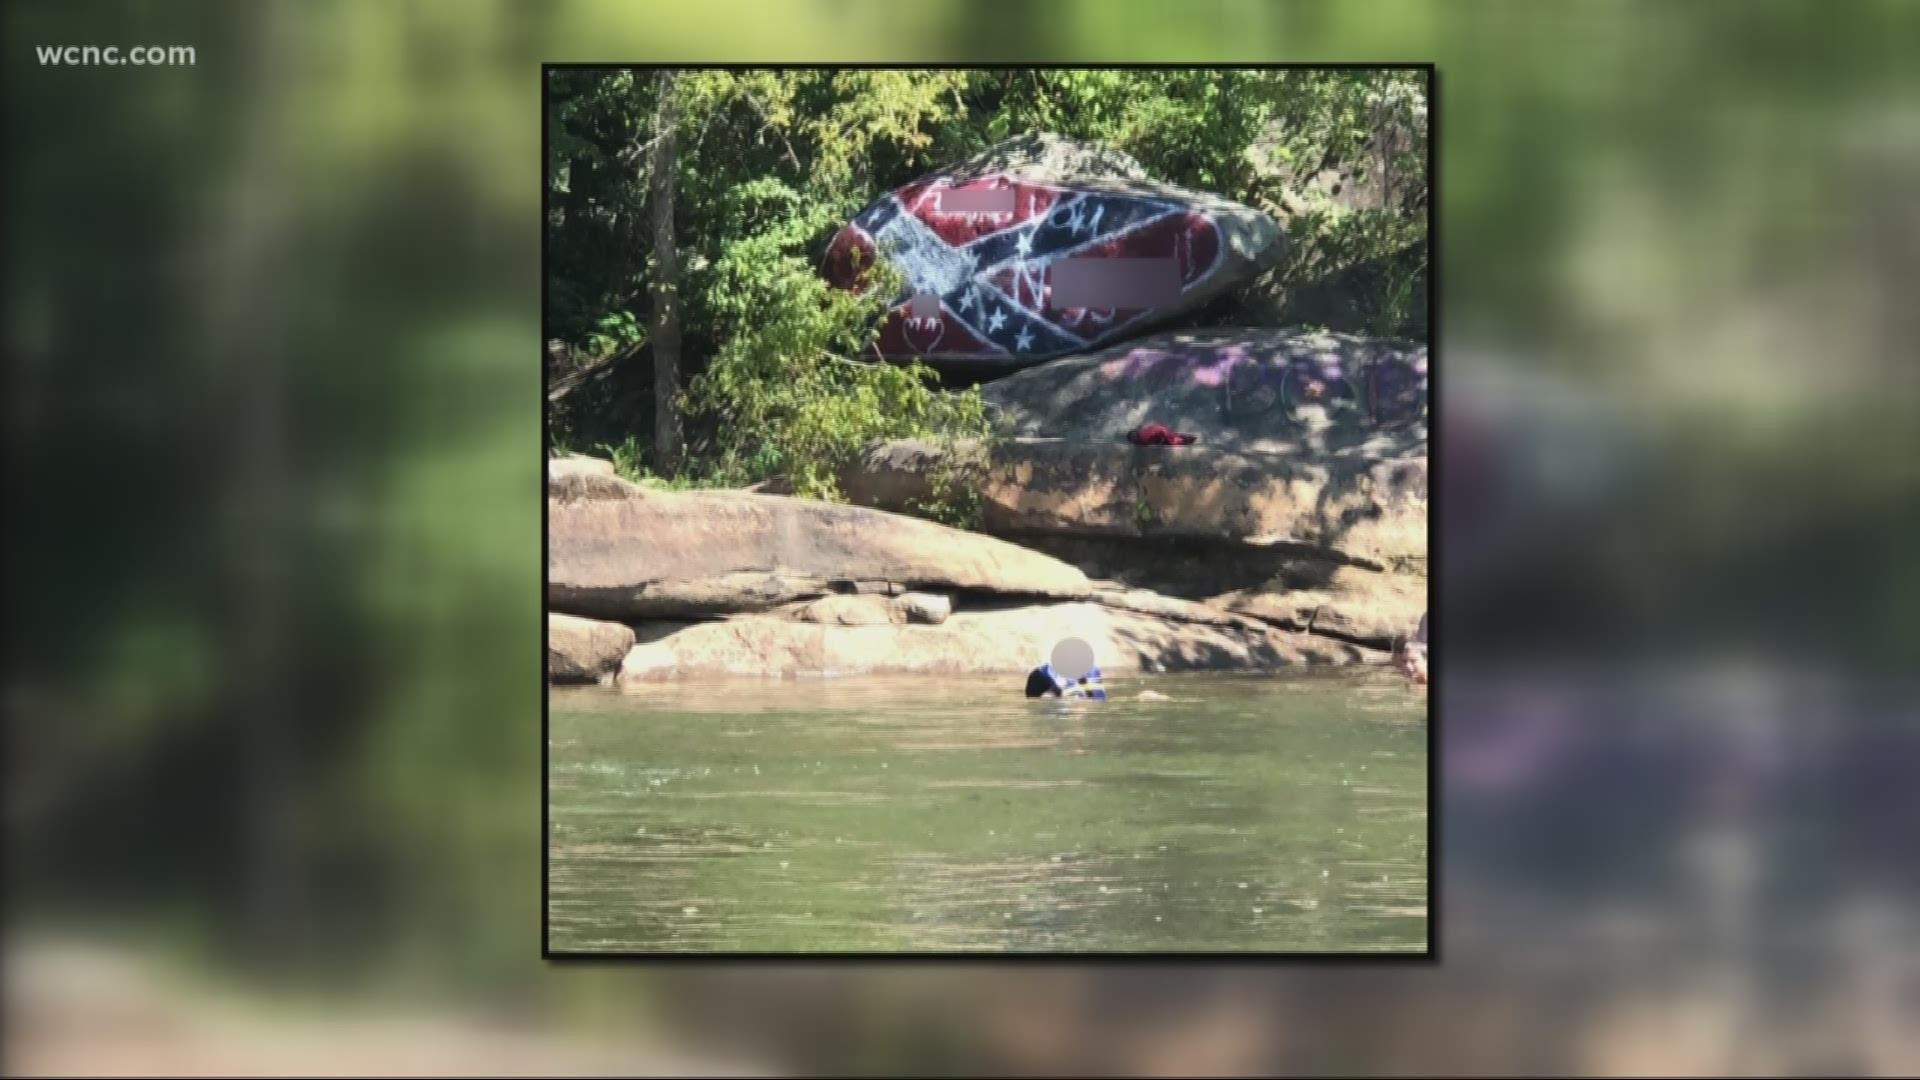 A family rafting on the Catawba River came across a shocking scenery over the weekend.